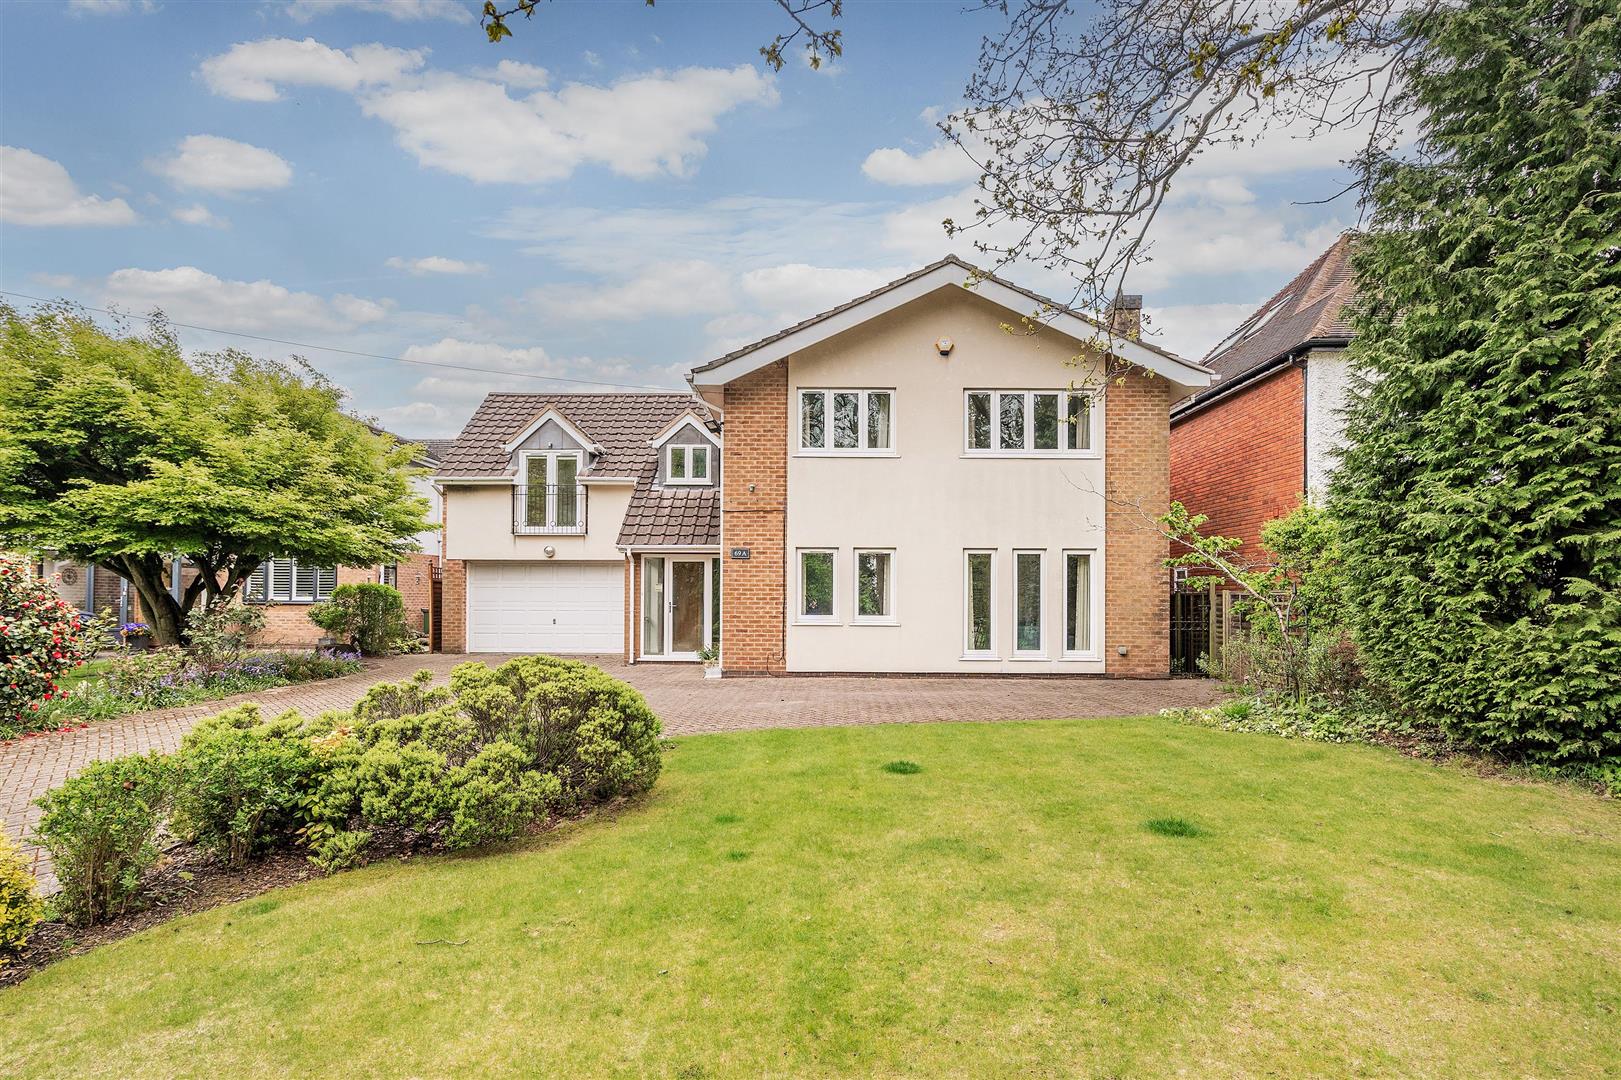 6 bed detached house for sale in Hampton Lane, Solihull 0